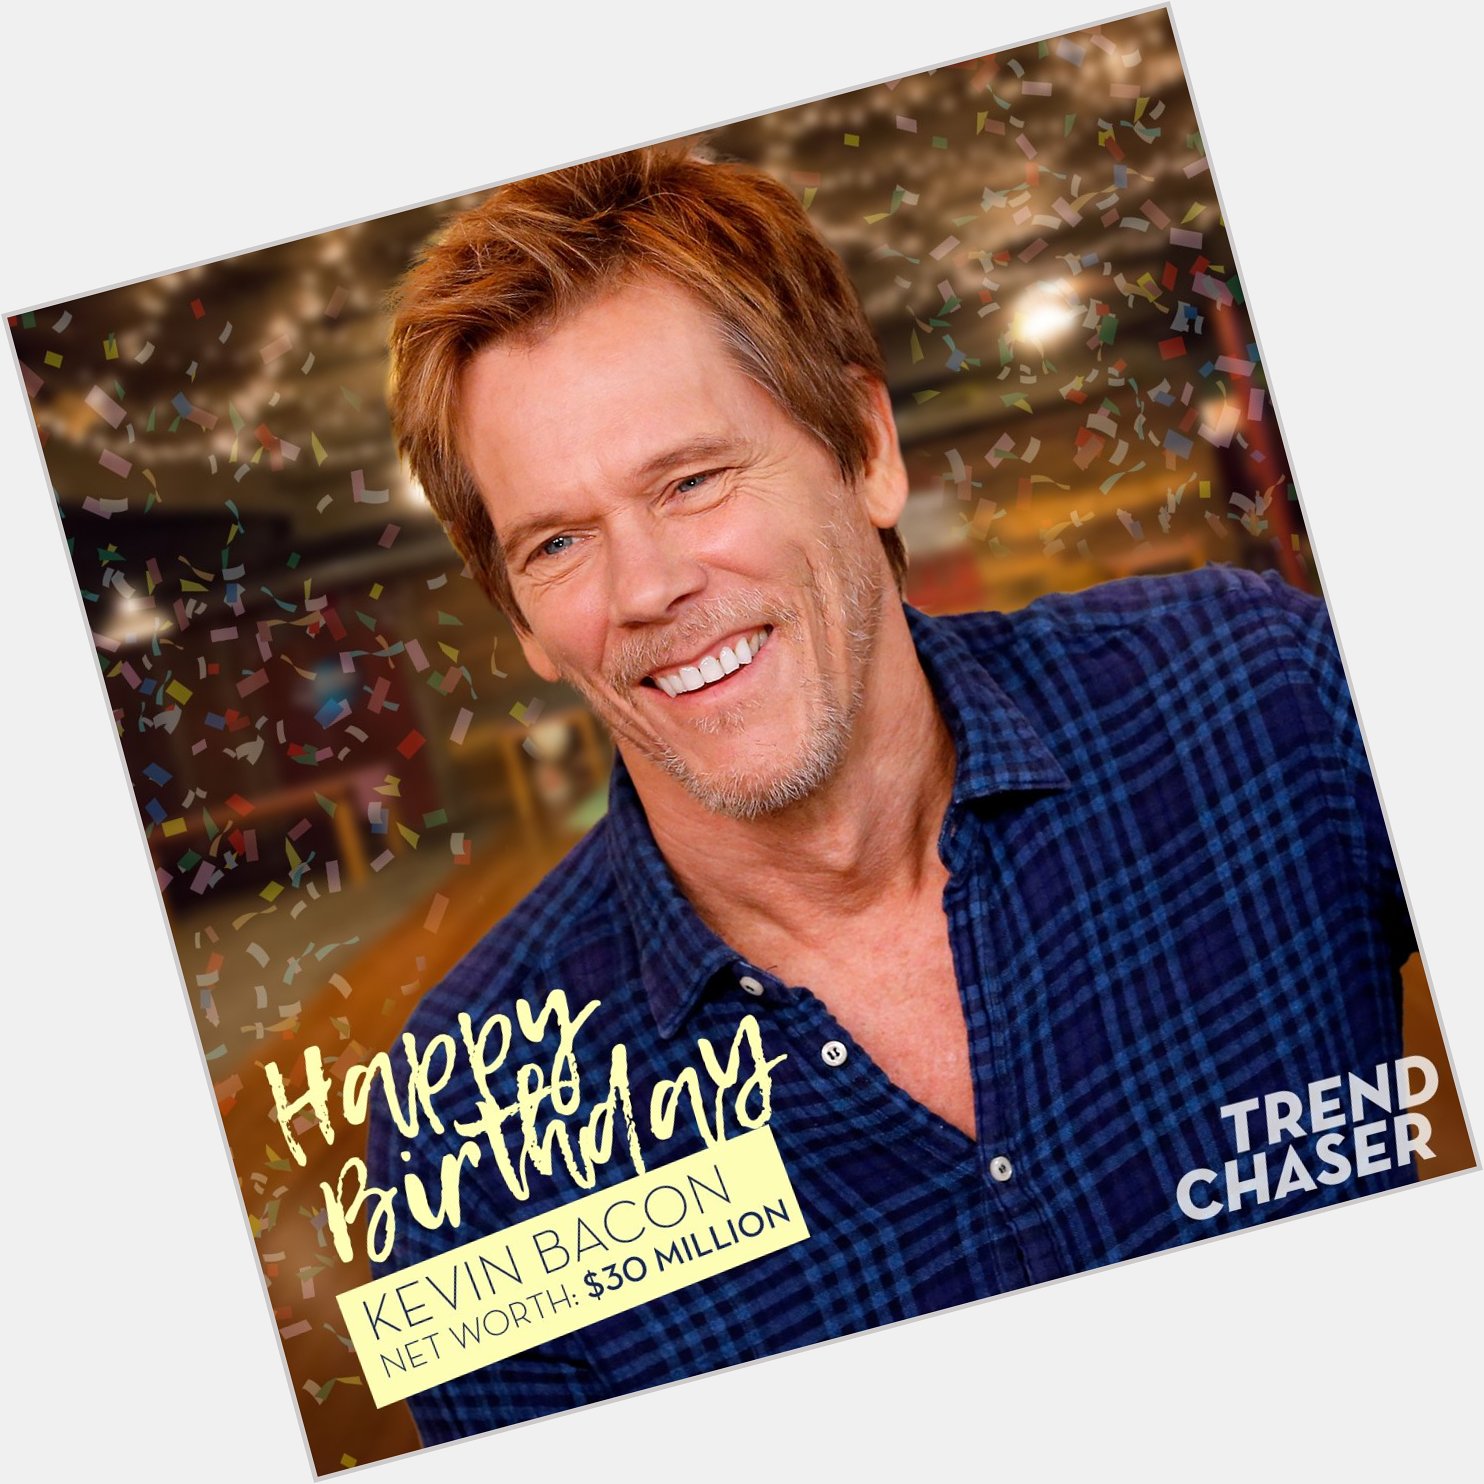 Happy birthday wishes go out to Kevin Bacon today!  